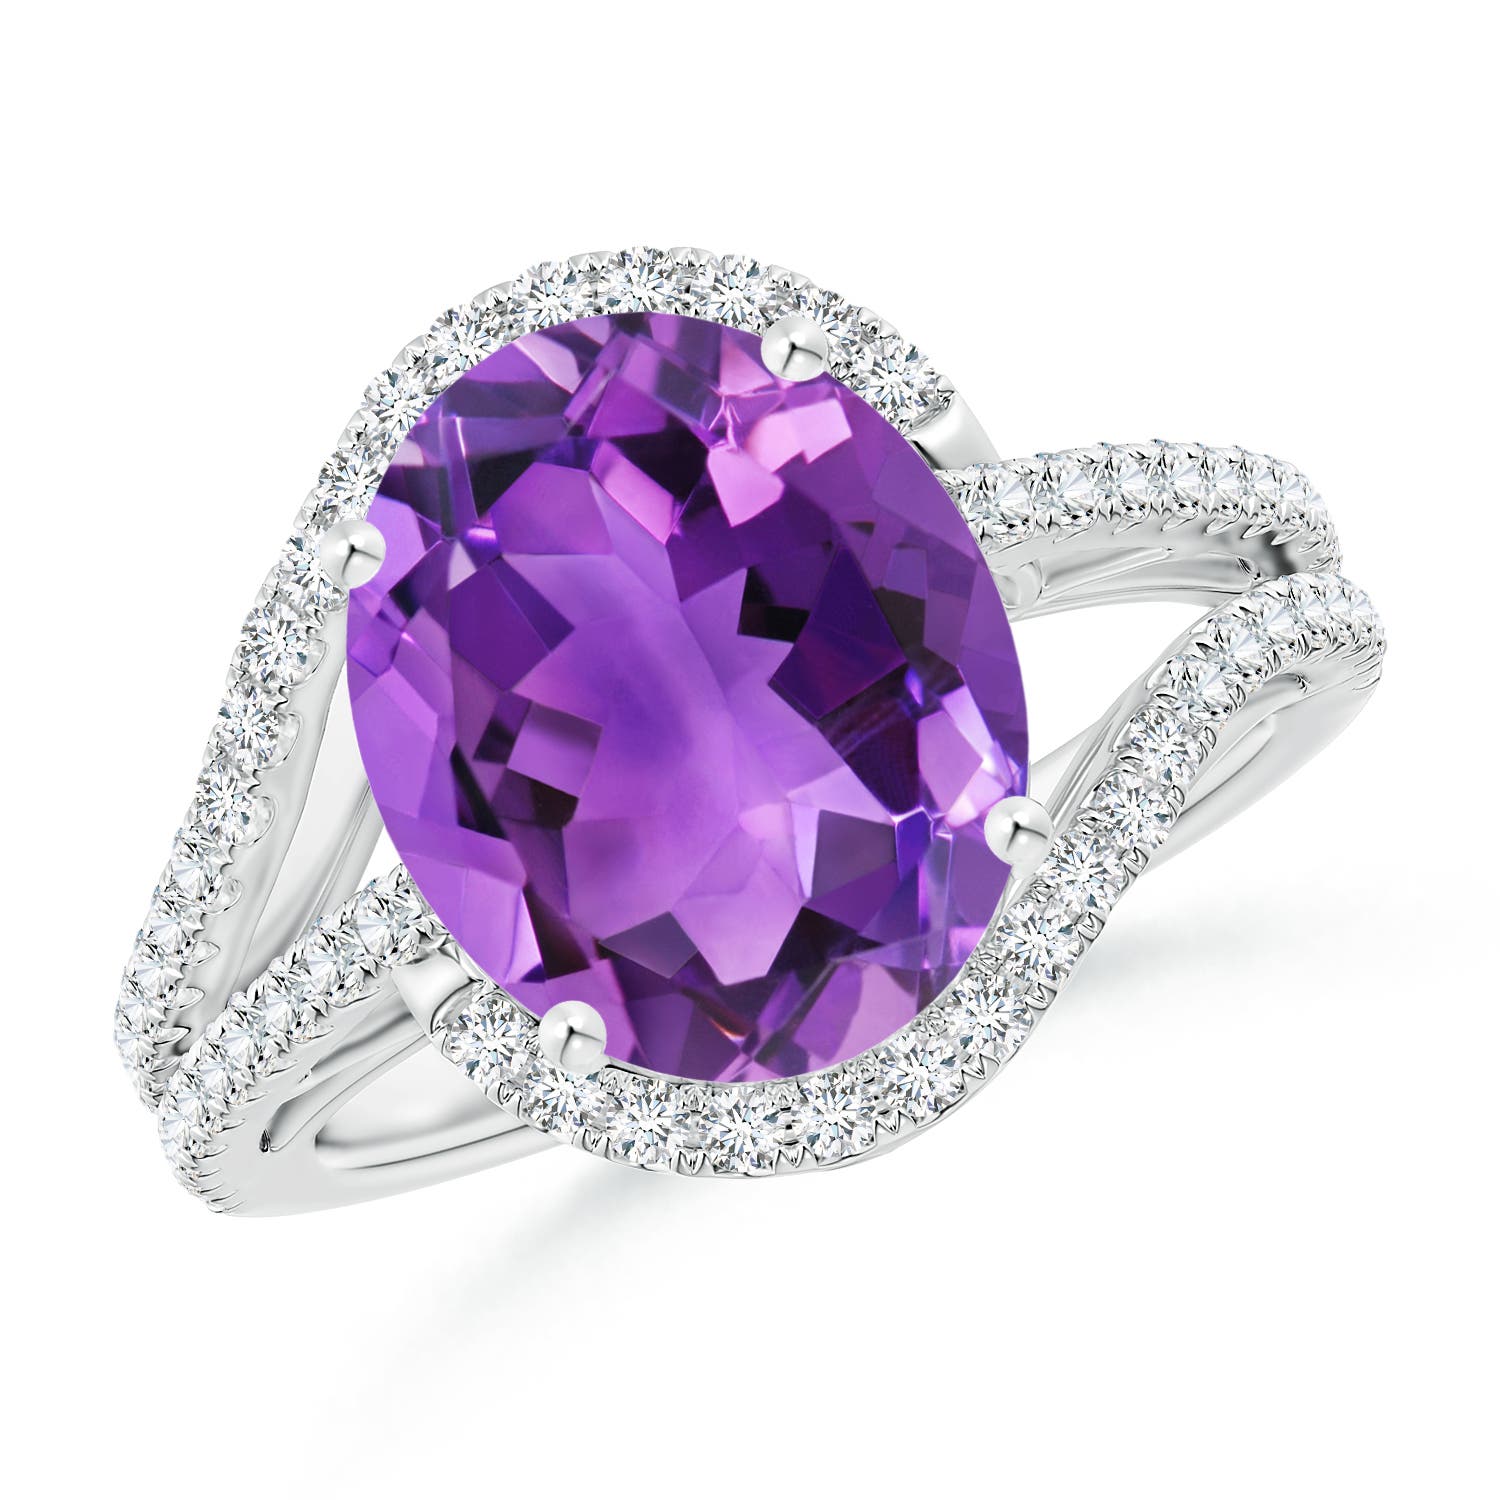 AAA - Amethyst / 4.92 CT / 14 KT White Gold